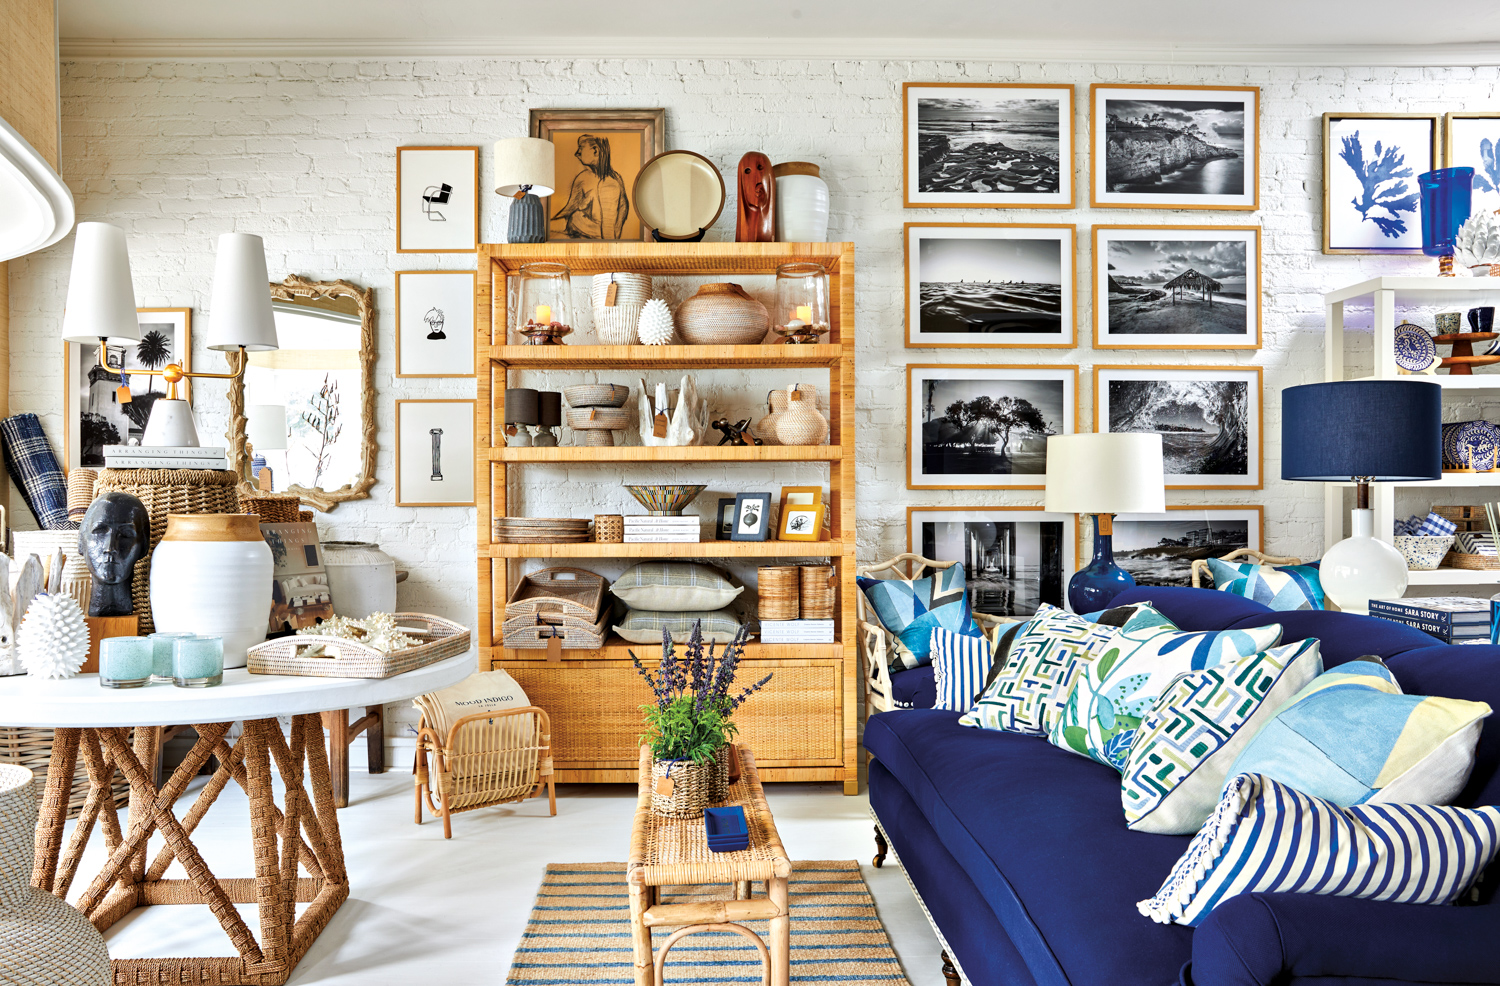 Mood Indigo with an indigo-colored sofa, rattan furniture and black-and-white photographs on the wall